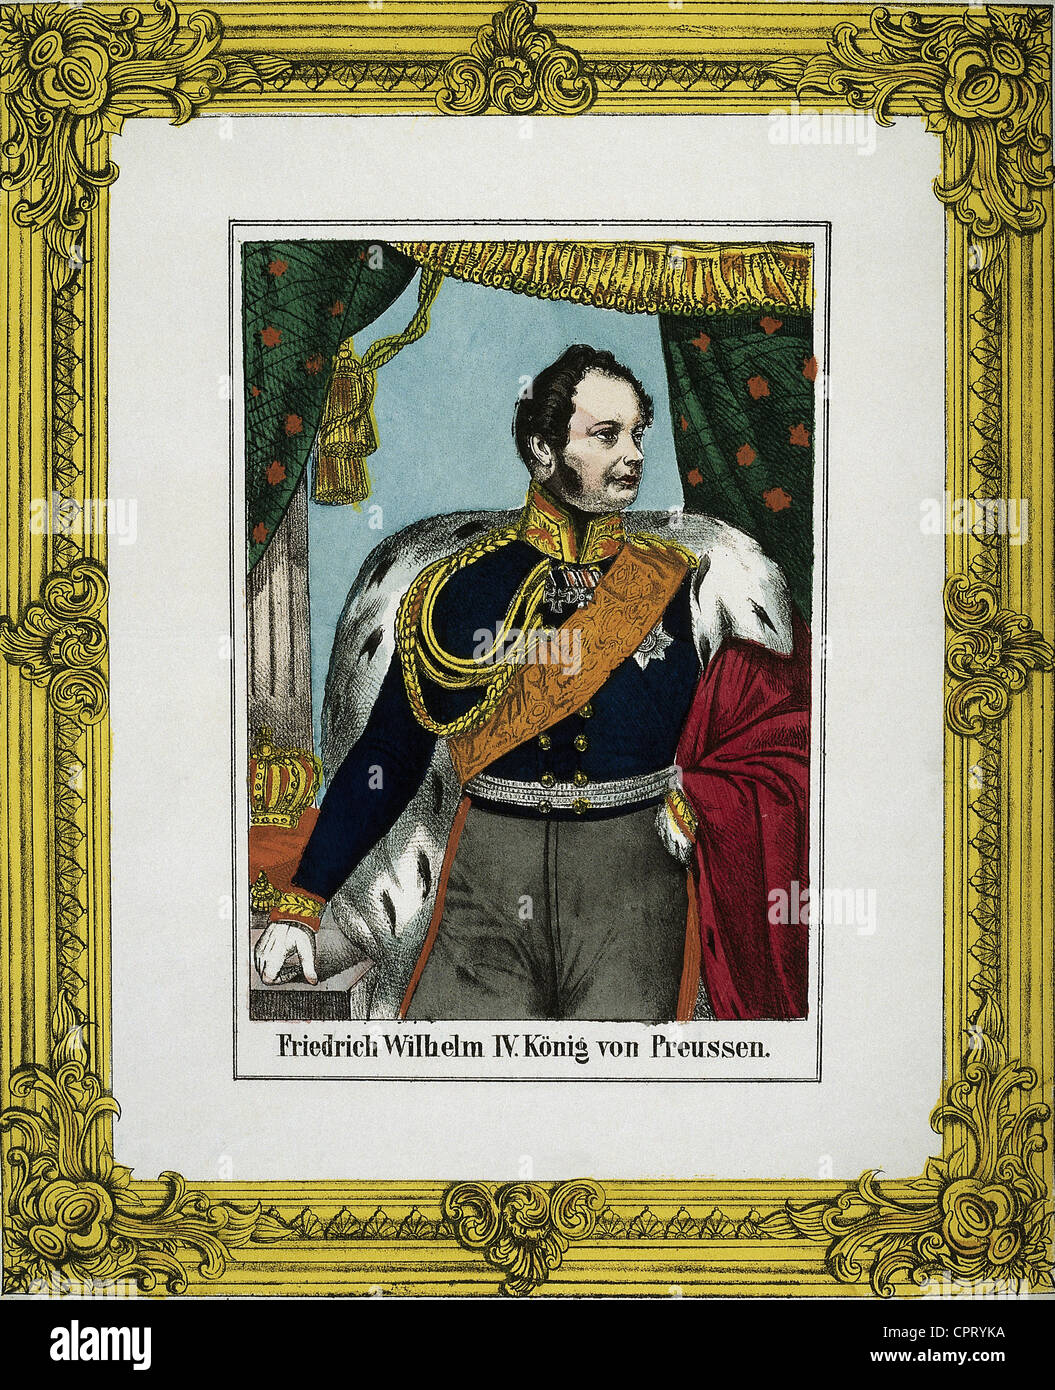 Frederick William IV, 15.10.1795 - 2.1.1861, King of Prussia 7.6.1840 - 26.10.1858, half length with golden frame, coloured lithograph, Oehmigke and Riemenschneider, Neuruppin, Germany, 19th century, Stock Photo